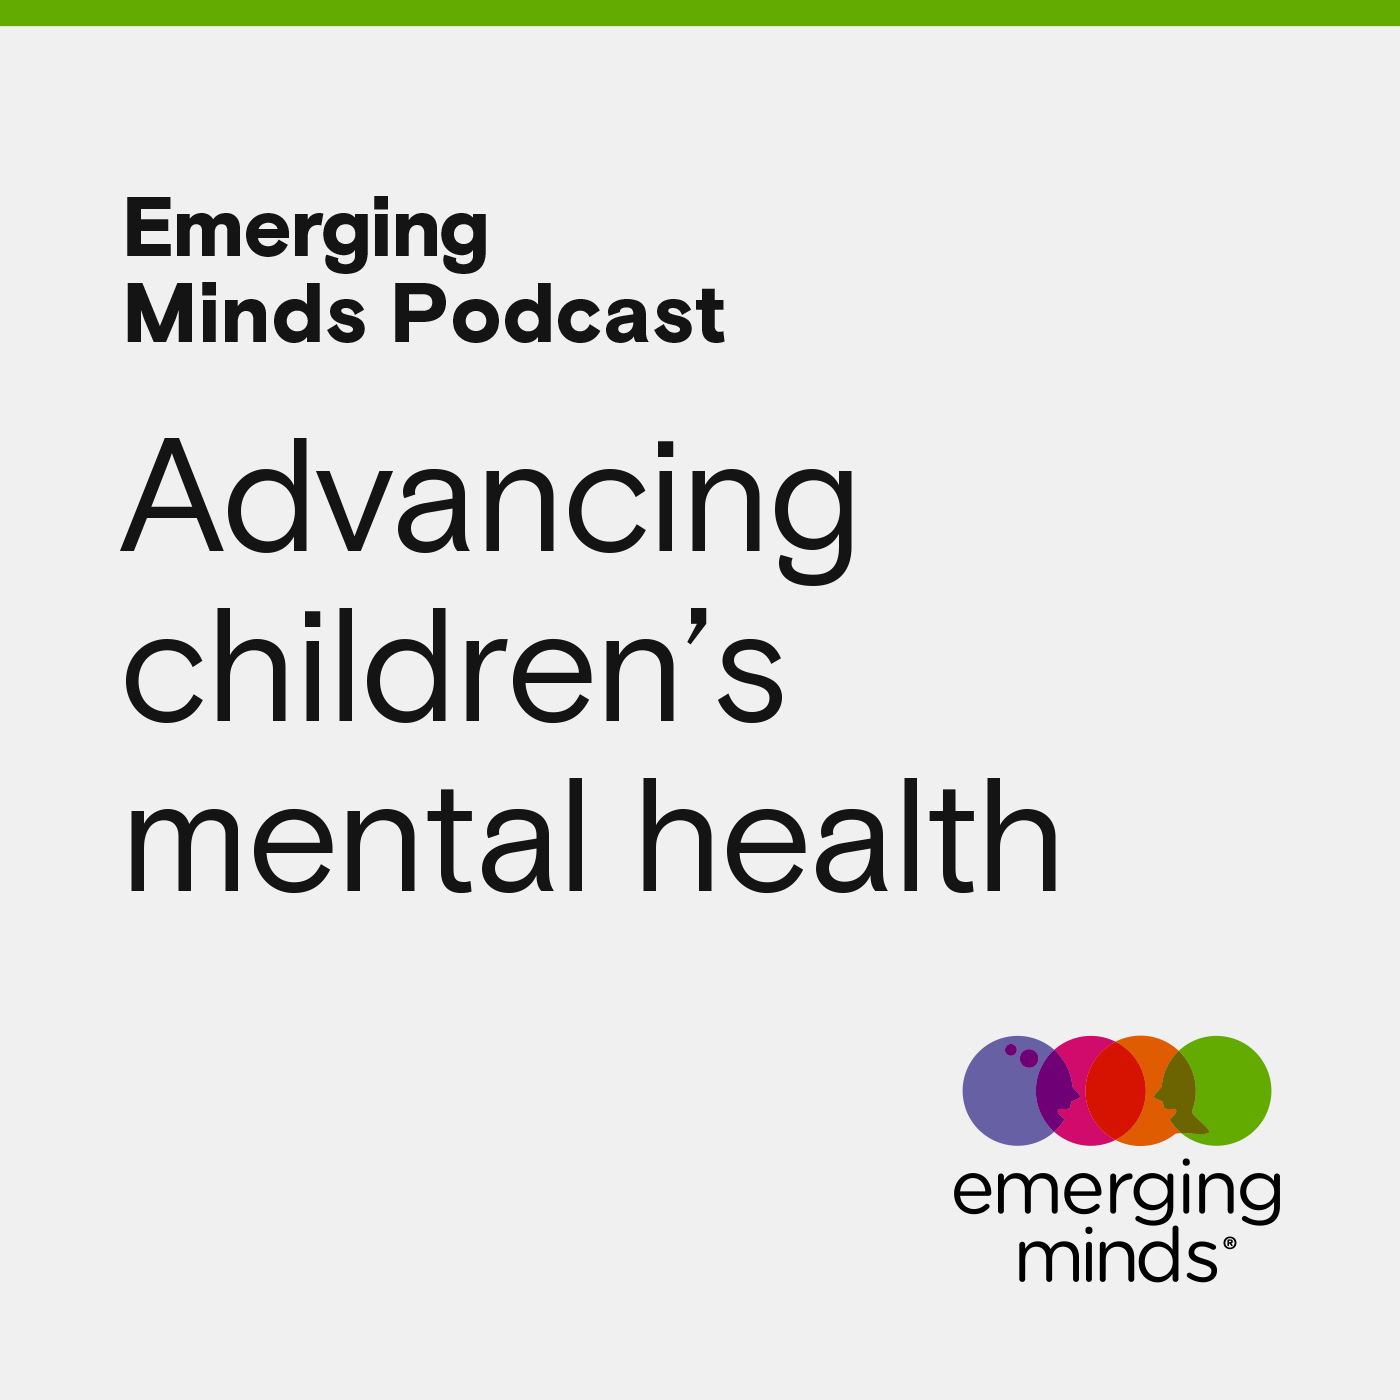 Emerging Minds podcast introduction